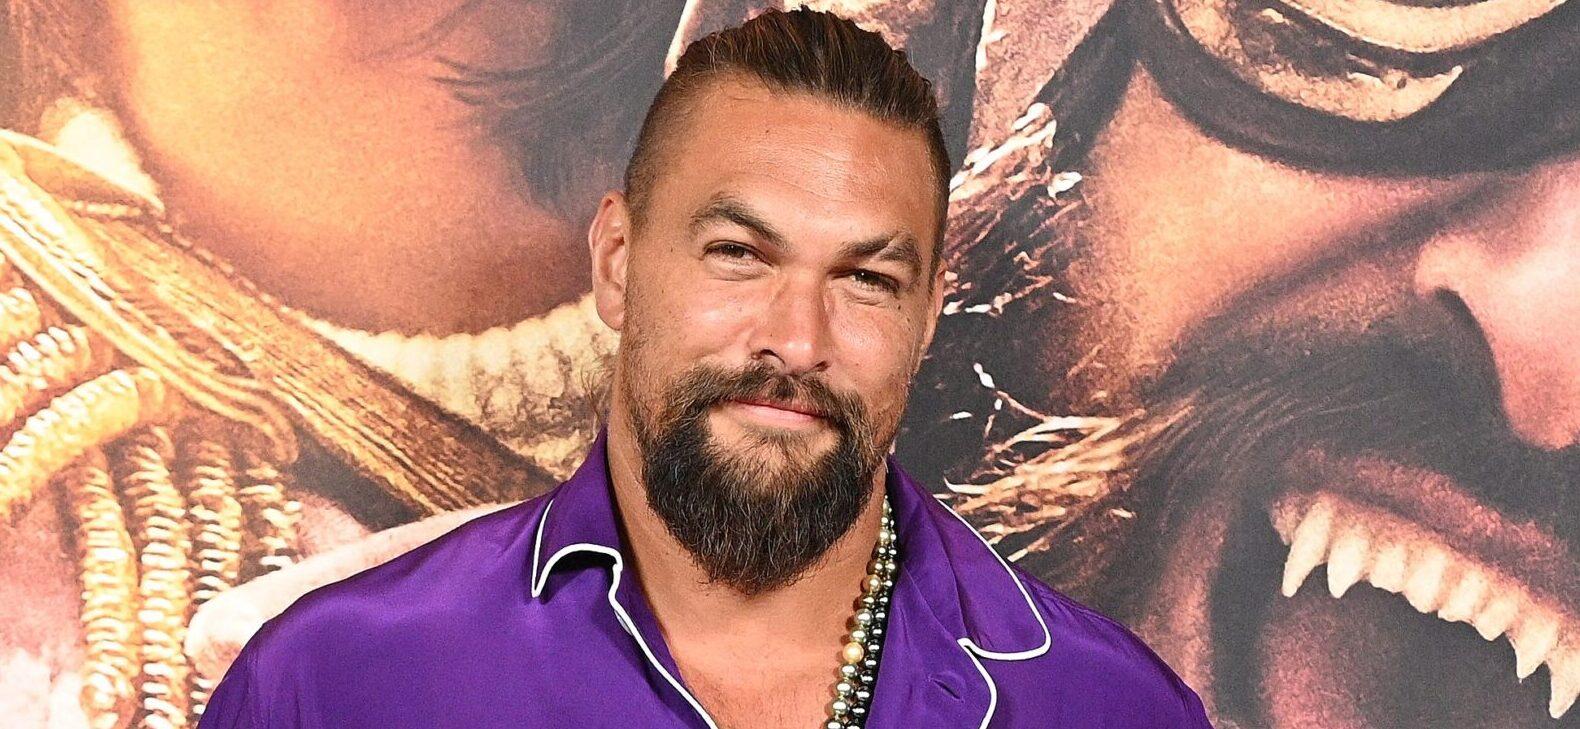 Jason Momoa Gets Body Shamed And It’s Just Too Much For The Fans!